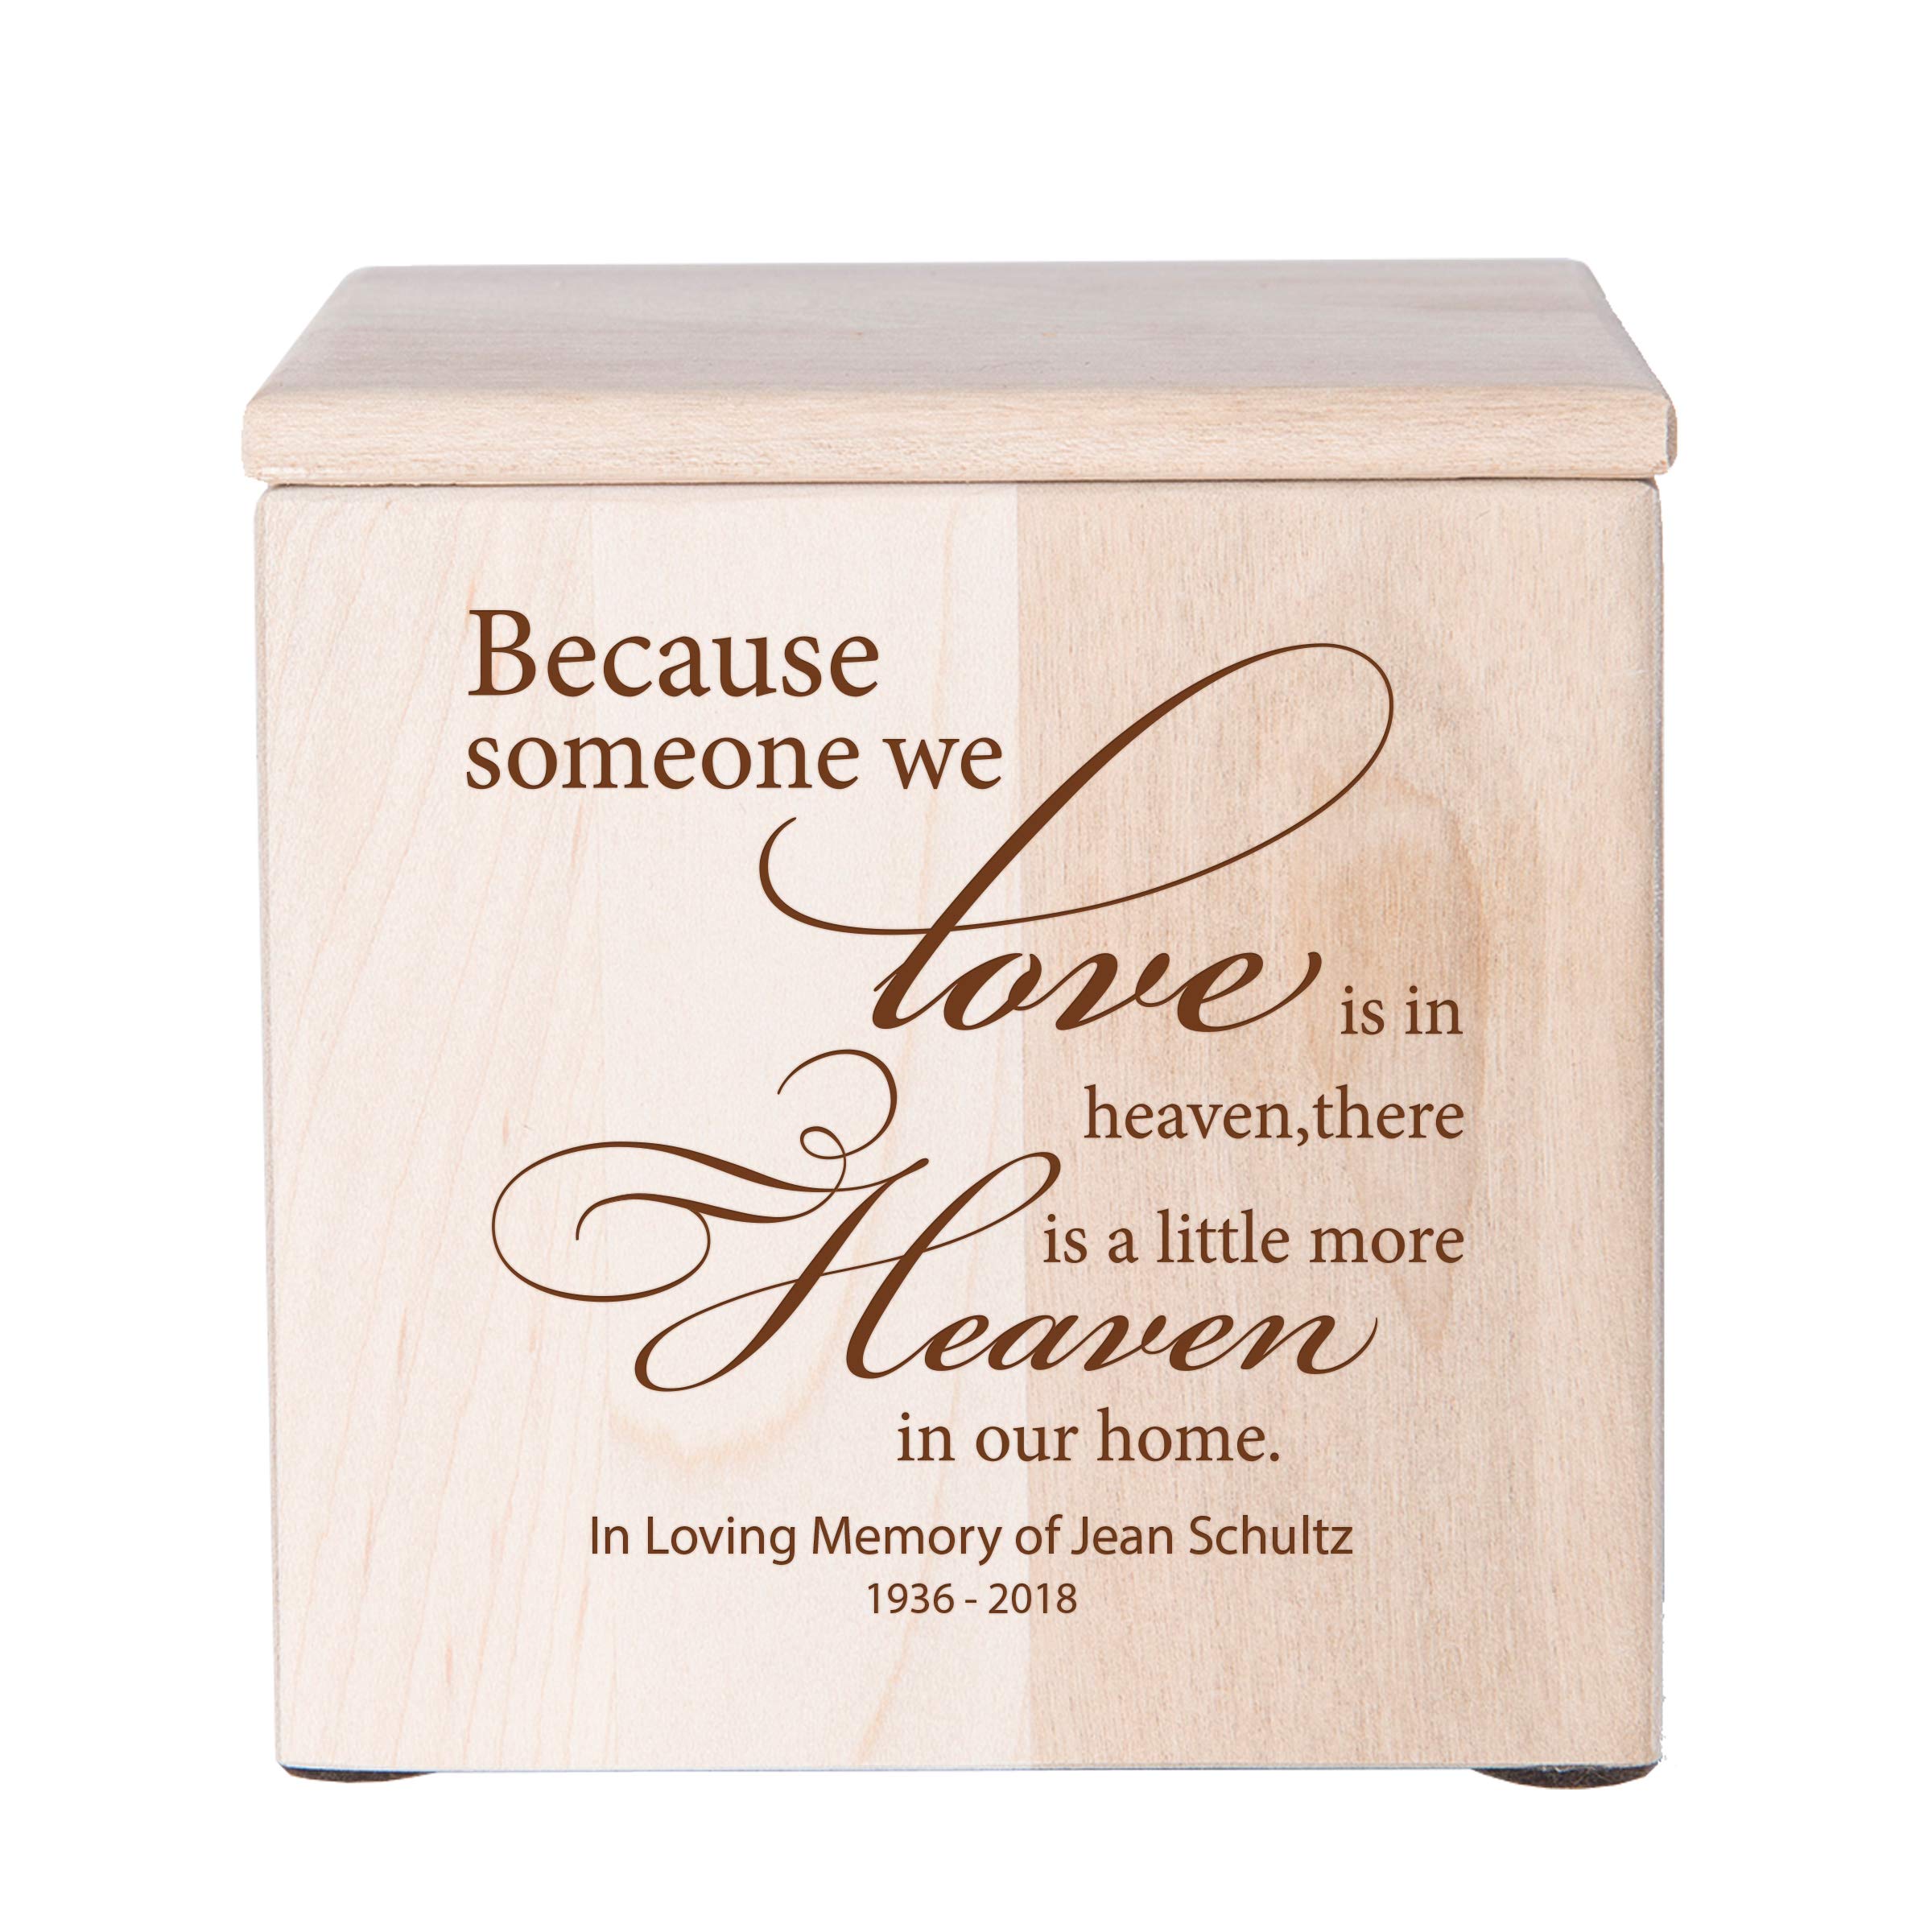 LifeSong Milestones Personalized Wooden Cremation Urn Keepsake Box for Human Ashes Because Someone We Love Memorial Service Small Funeral Urn Holds...